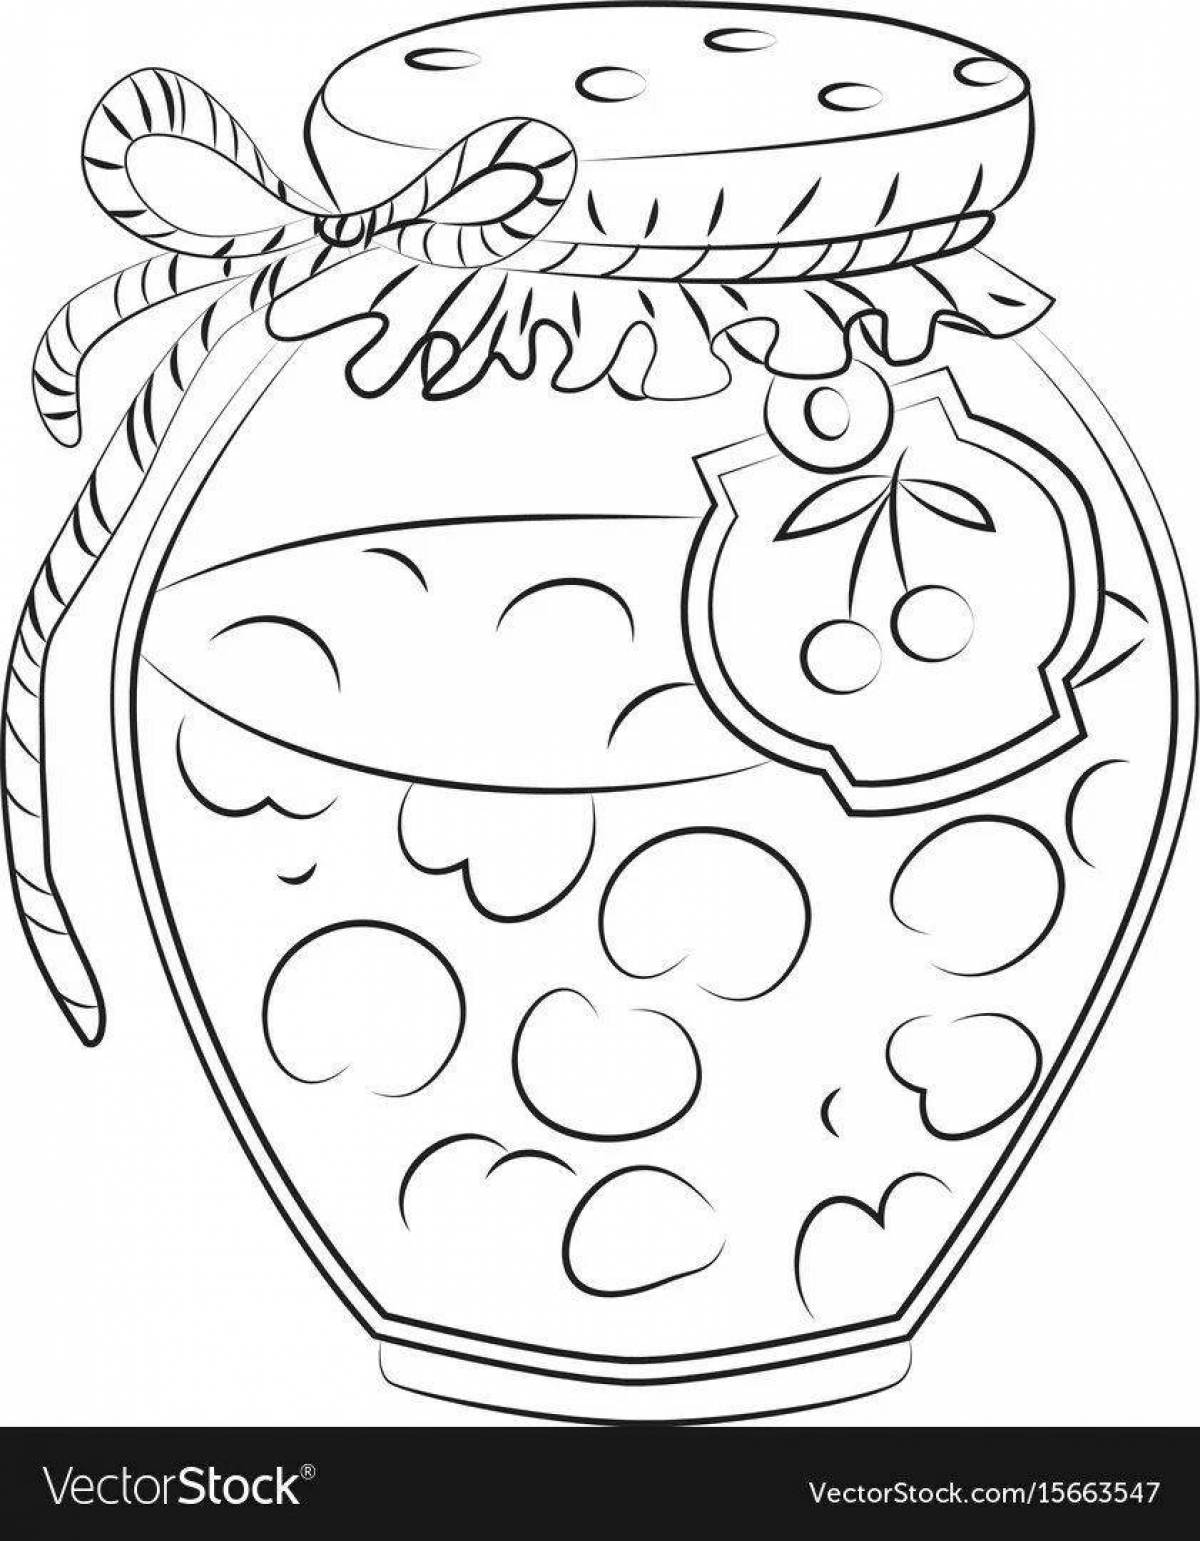 Playful jam coloring page for kids